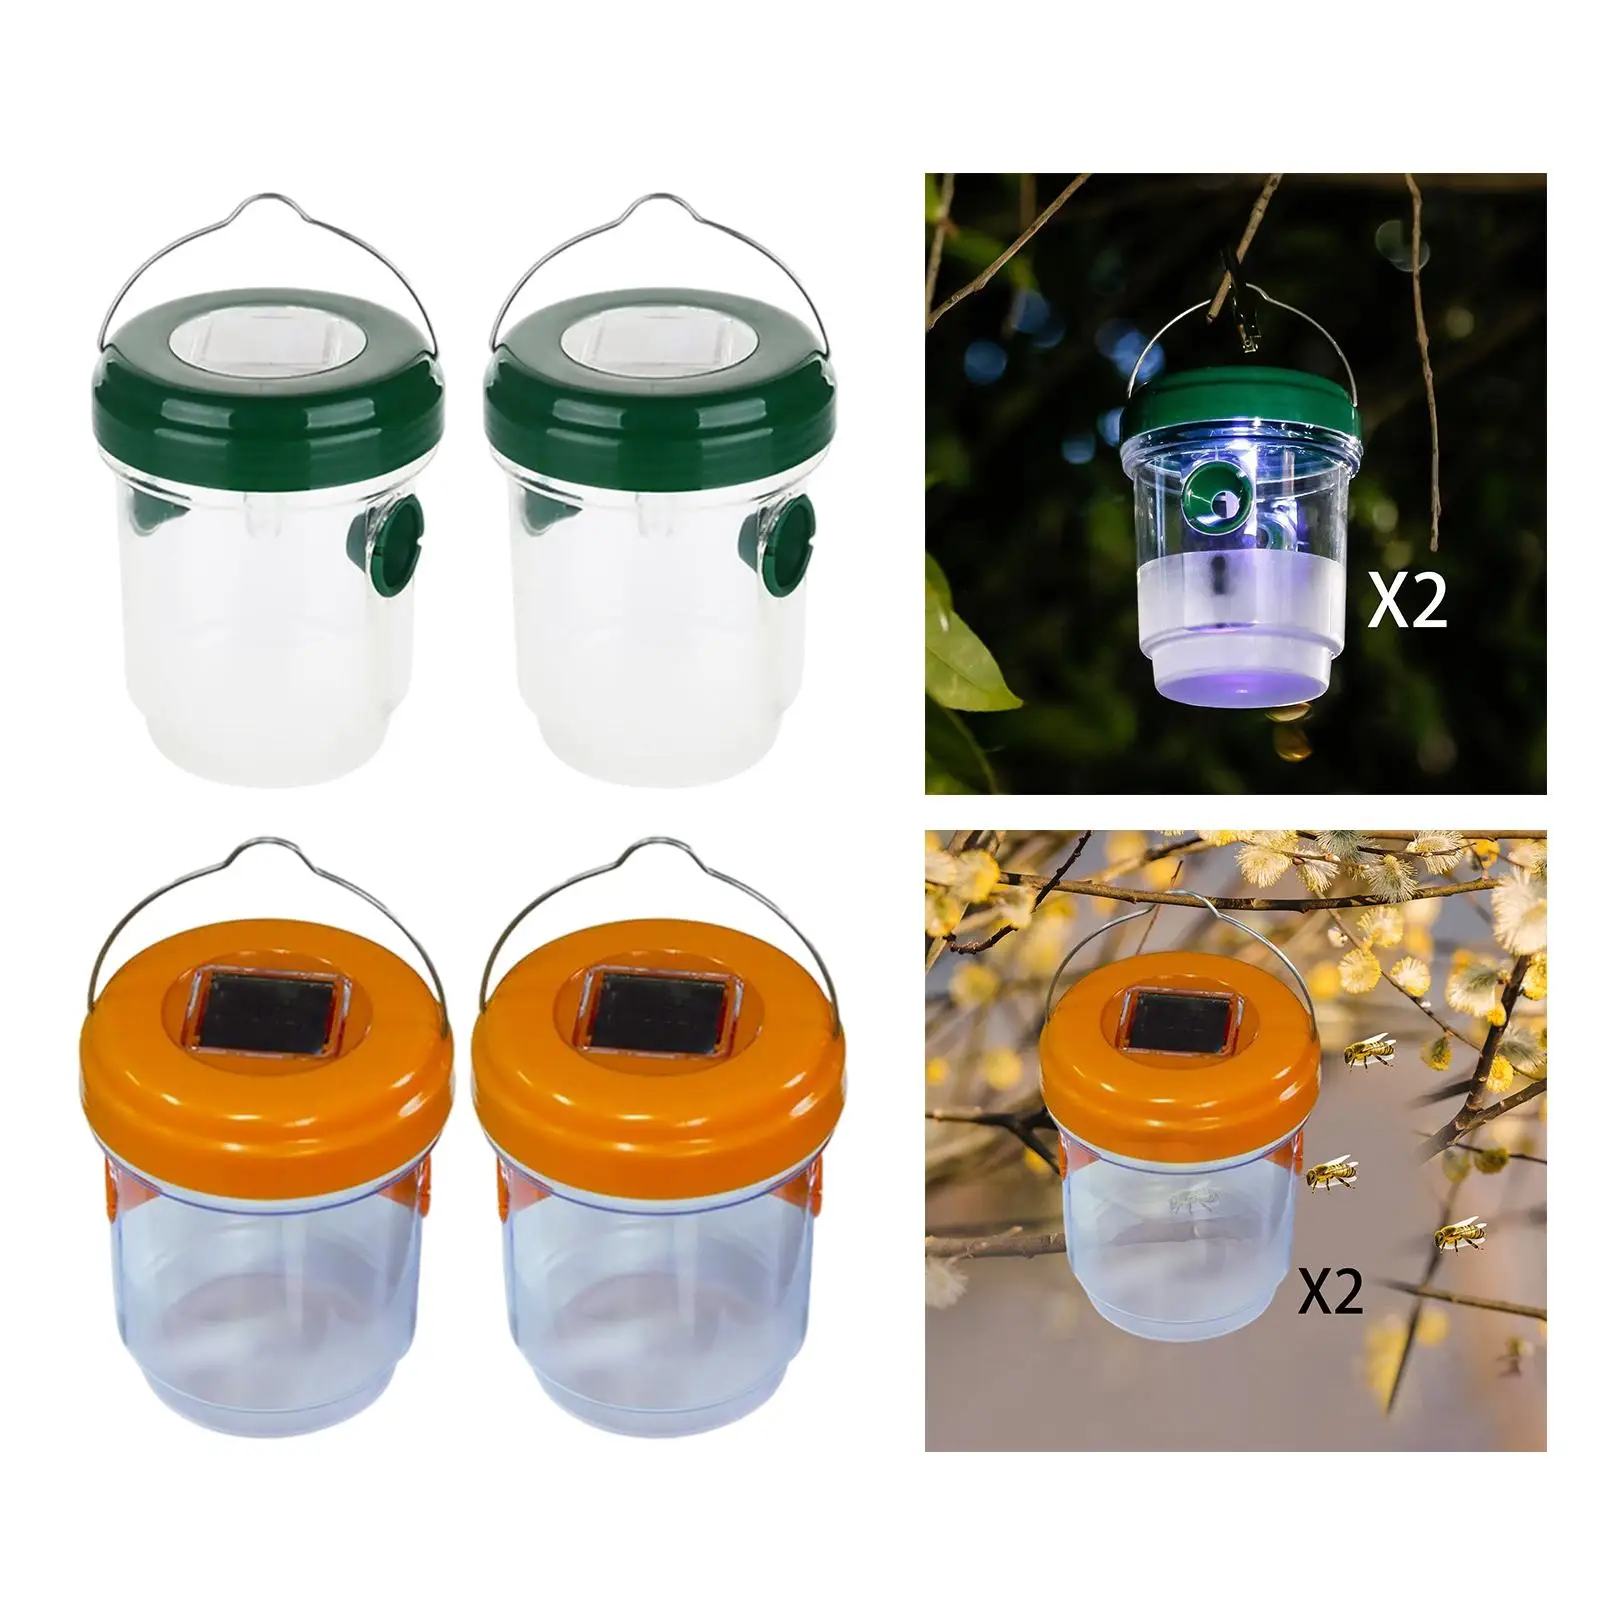 2x Solar Wasp Killer Fly Trap Reusable Fruit Fly Bee Trap Insect Catching Lamp Hanging Wasp Trap Catcher for Outdoor Garden